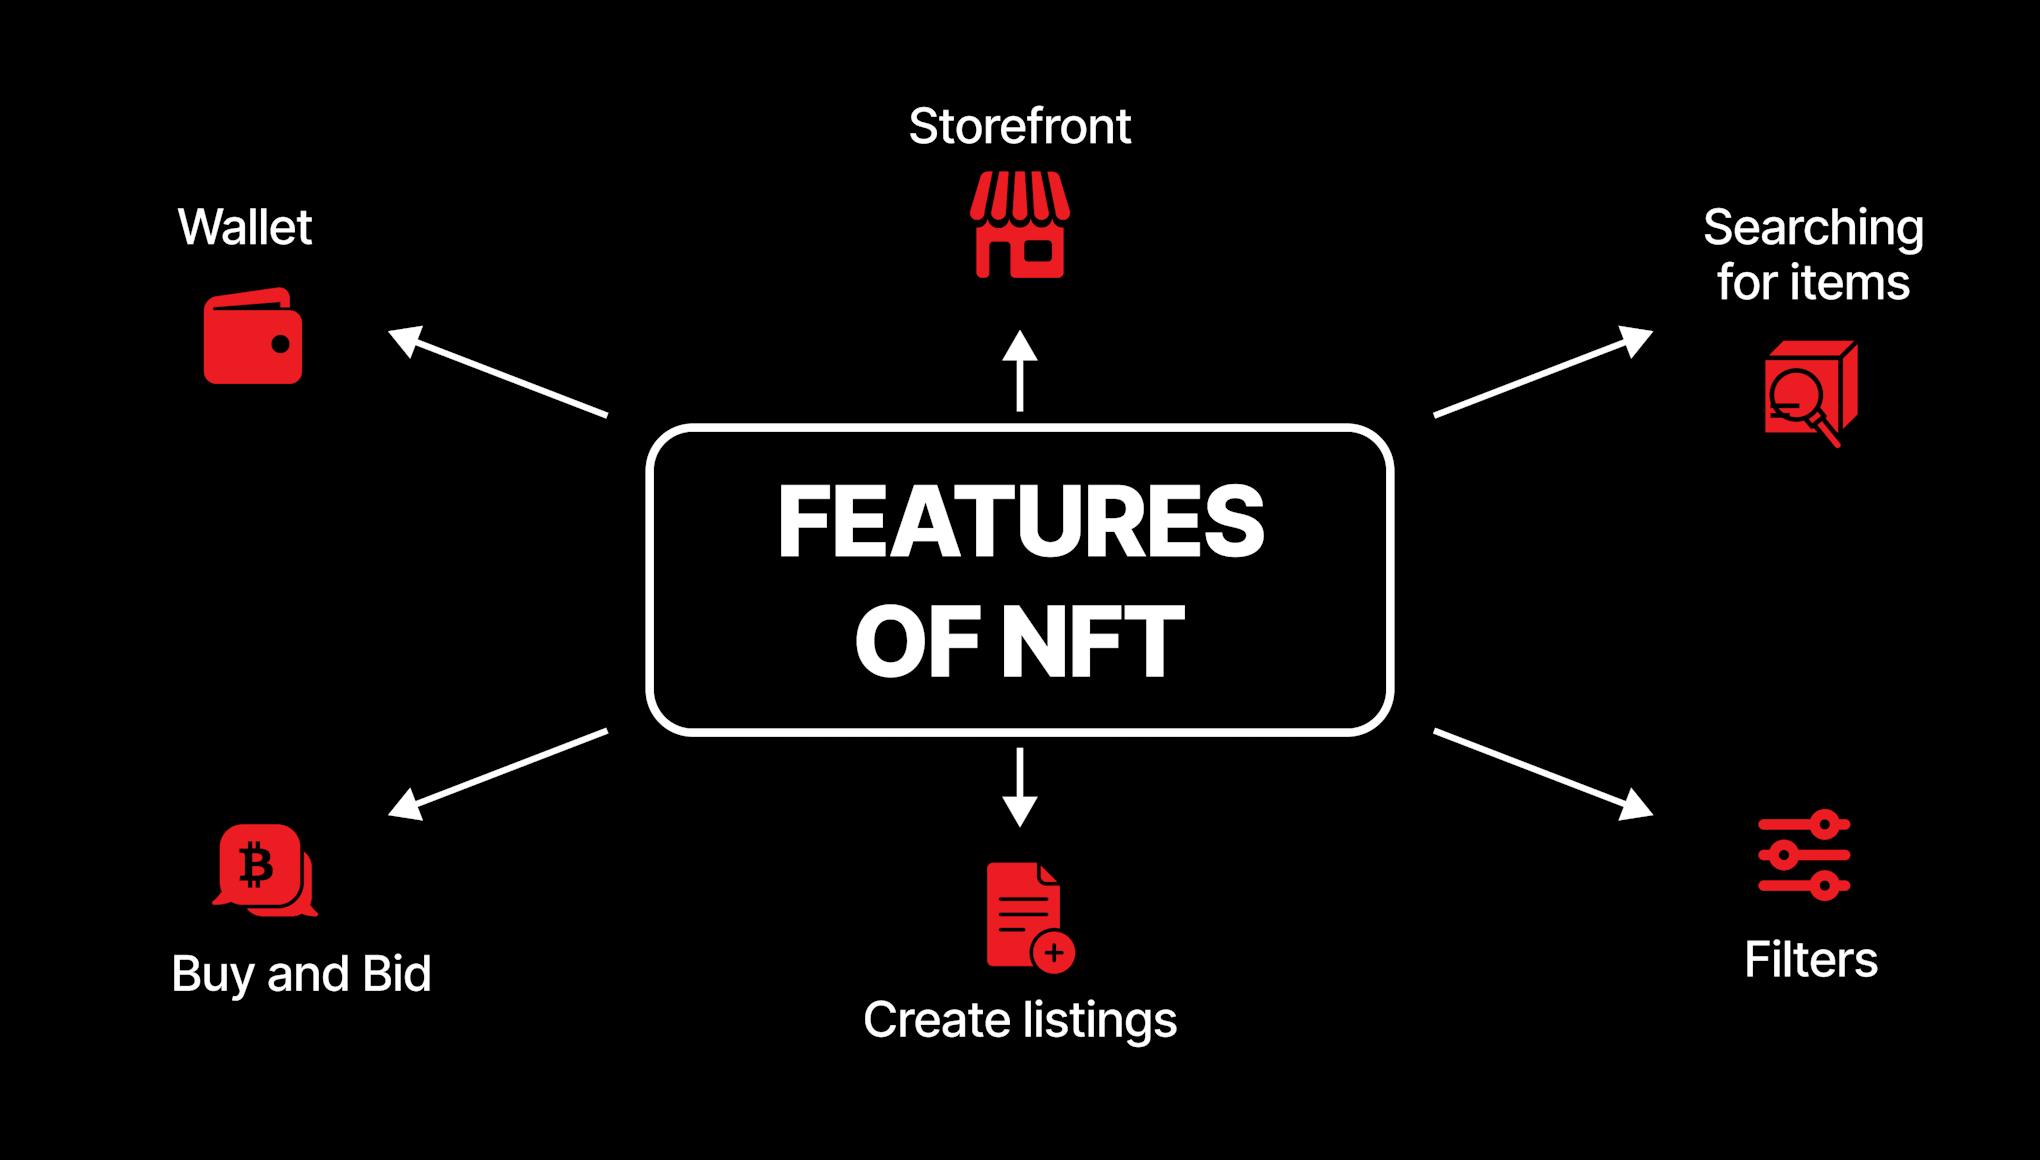 The must-have features for NFT marketplace.